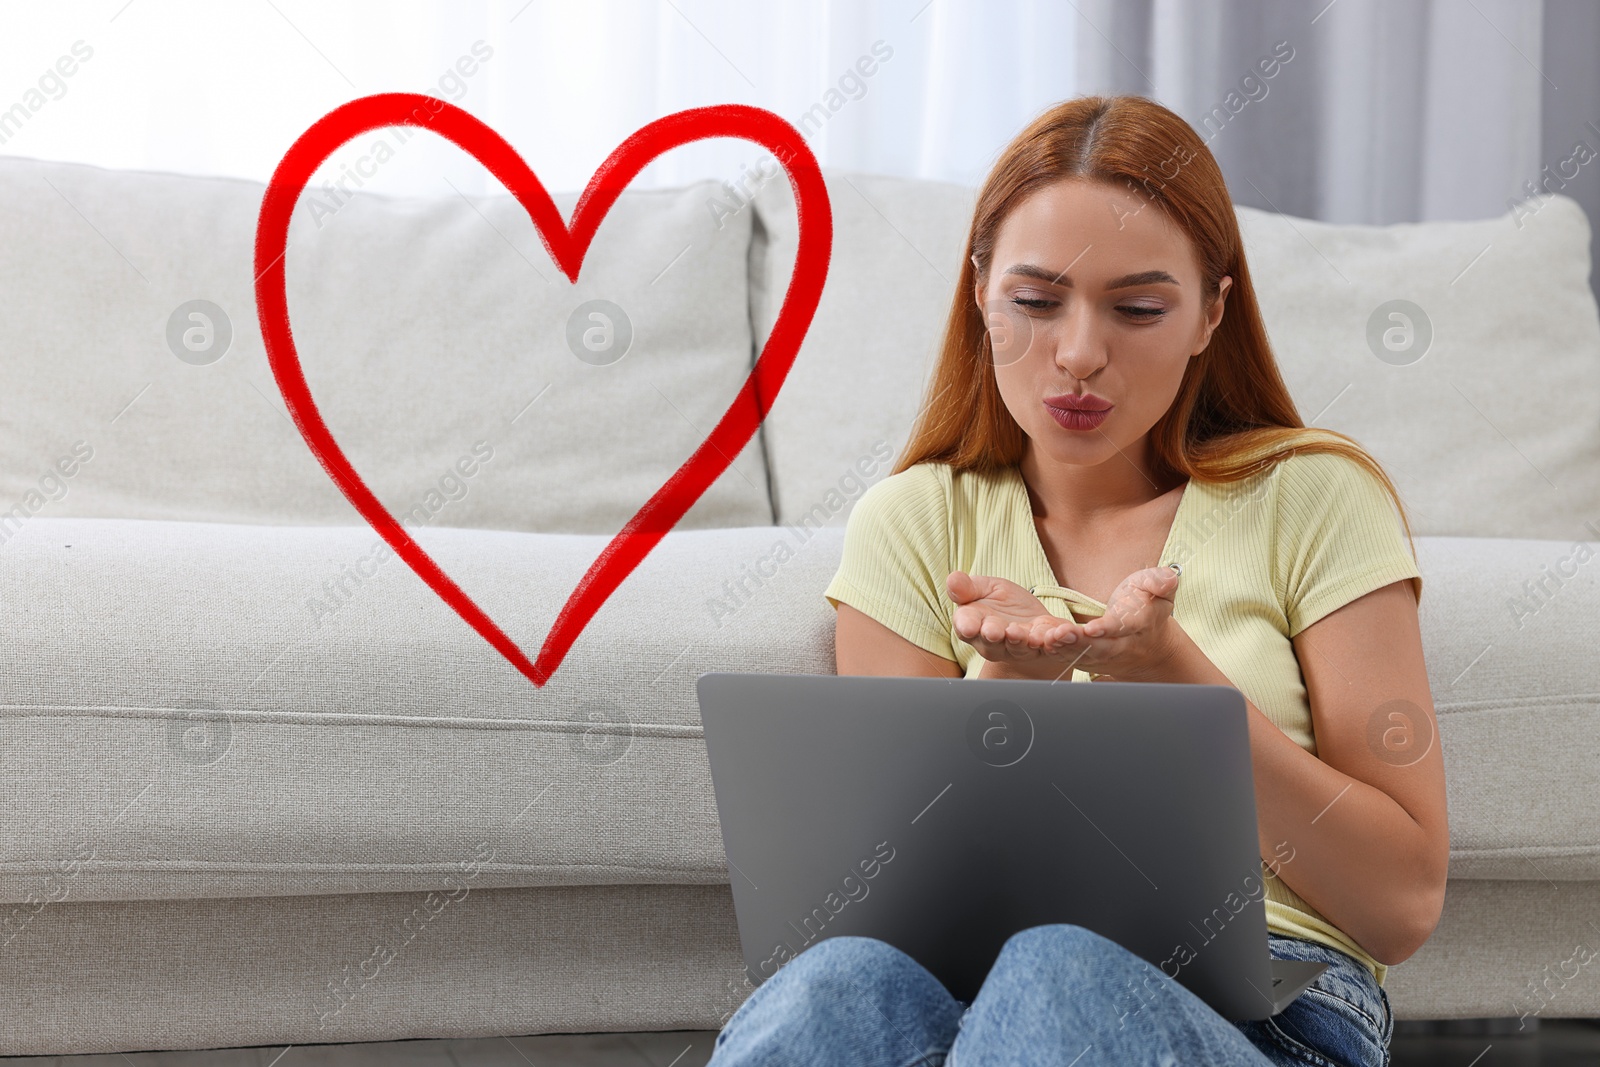 Image of Long distance relationship. Young woman sending air kiss to her loved one via video chat indoors. Red heart near her